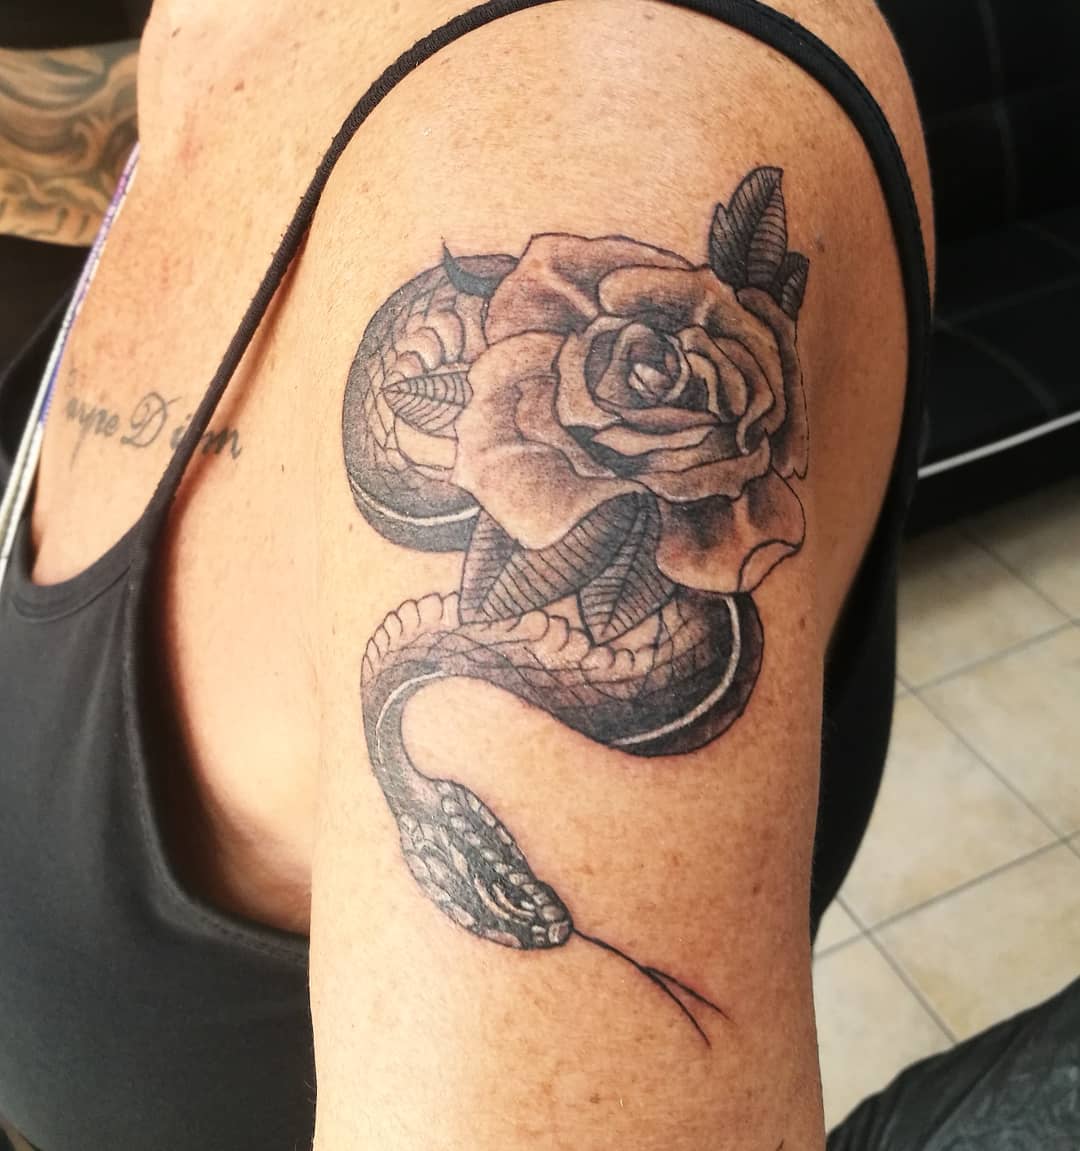 Cute Rose With Snake Tattoo